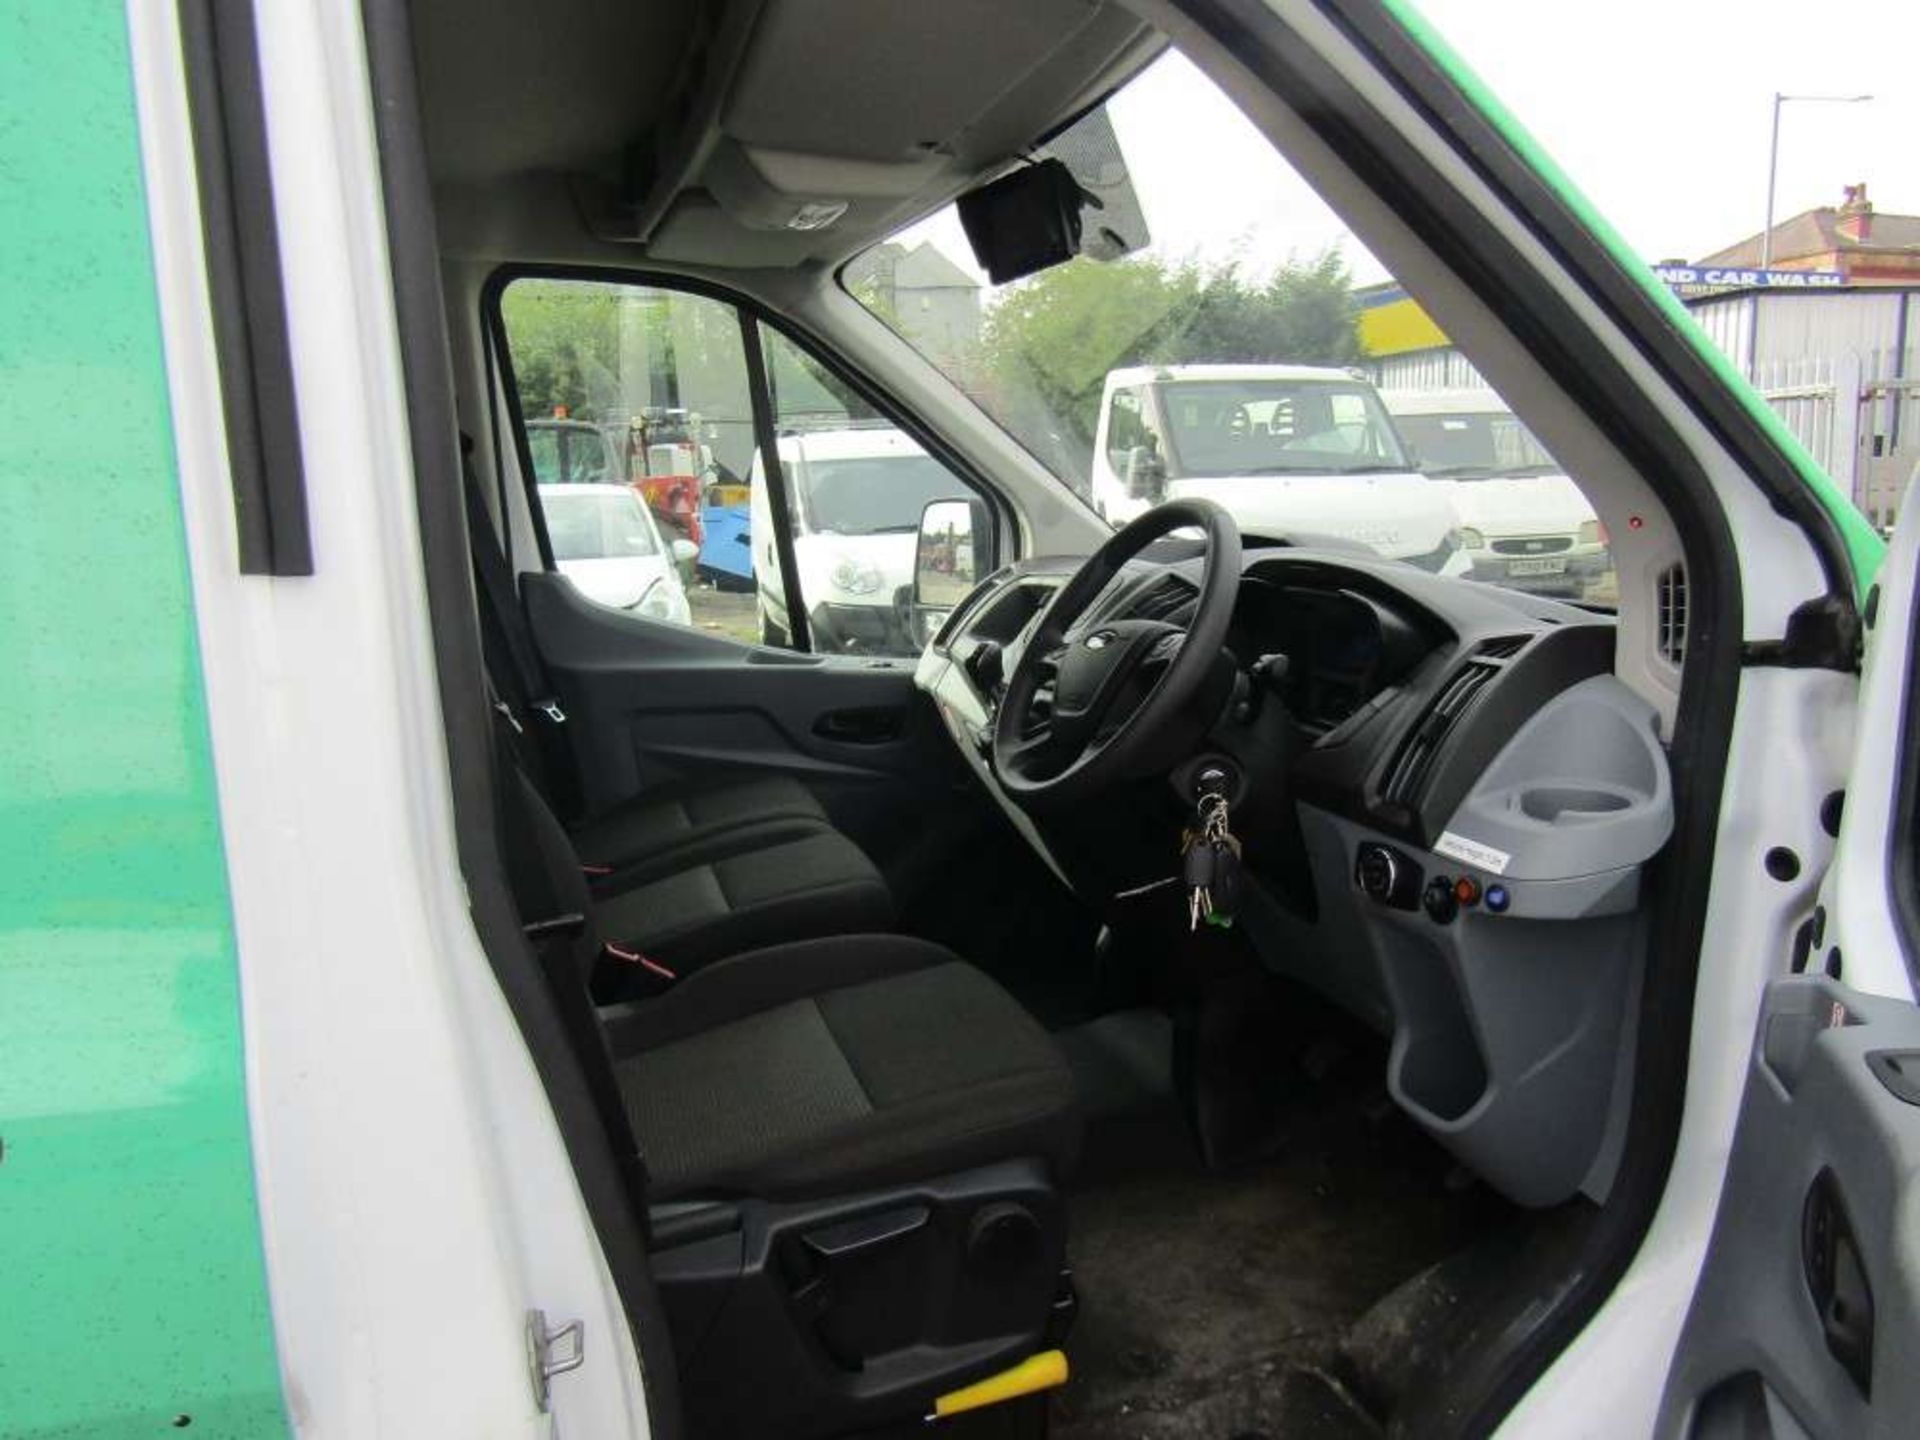 2019 19 reg Ford Transit 350 Mobile Youth Unit - 1083 Miles ONLY (Direct Council) - Image 8 of 9